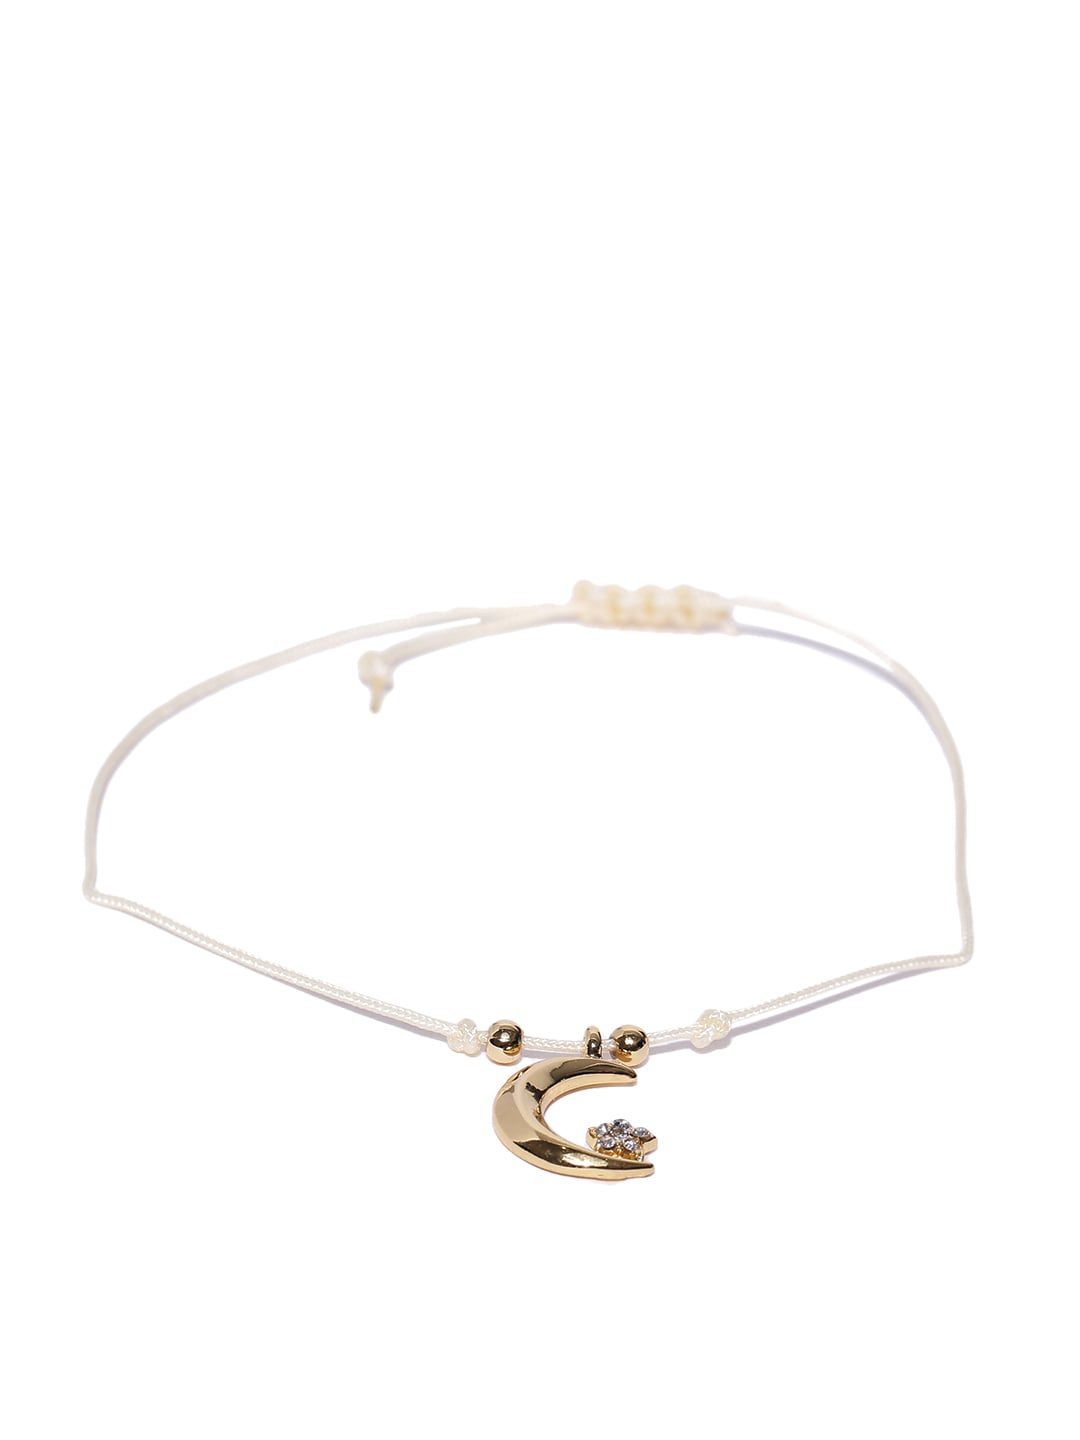 Accessorize Off-White Gold-Plated Charm Bracelet Price in India